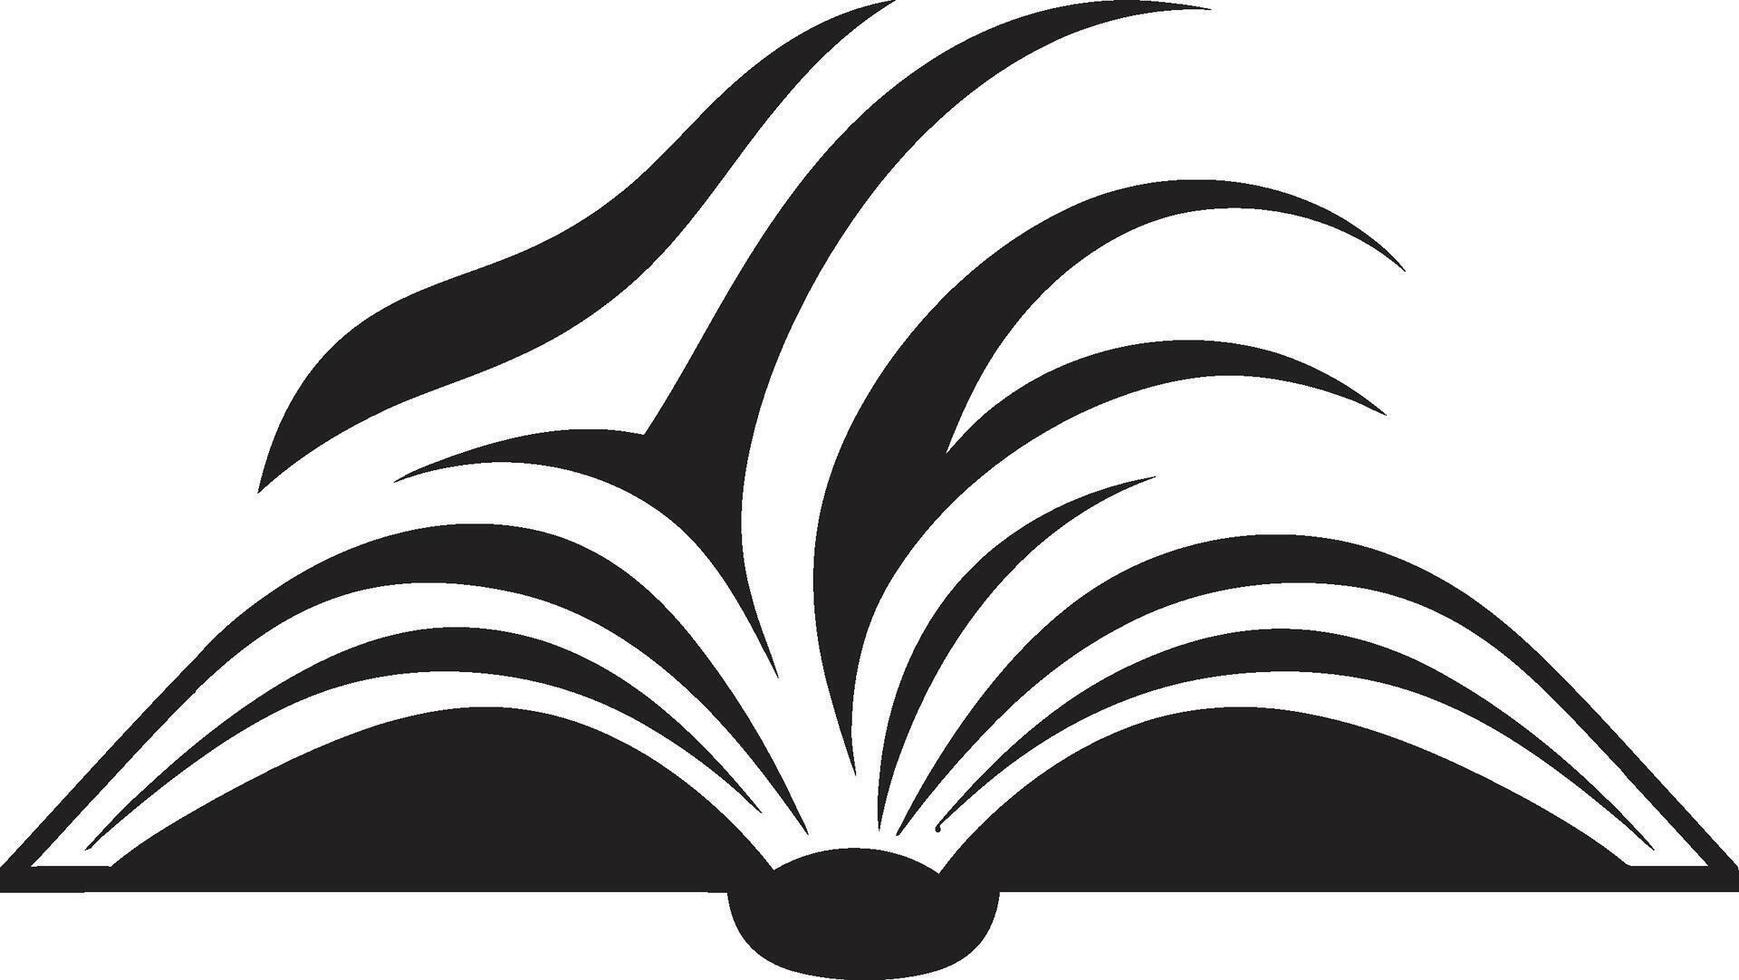 Opened Book Elegance Stylish Logo for Literary Appeal Knowledge Unveiled Dark Icon with Intricate Book Design vector